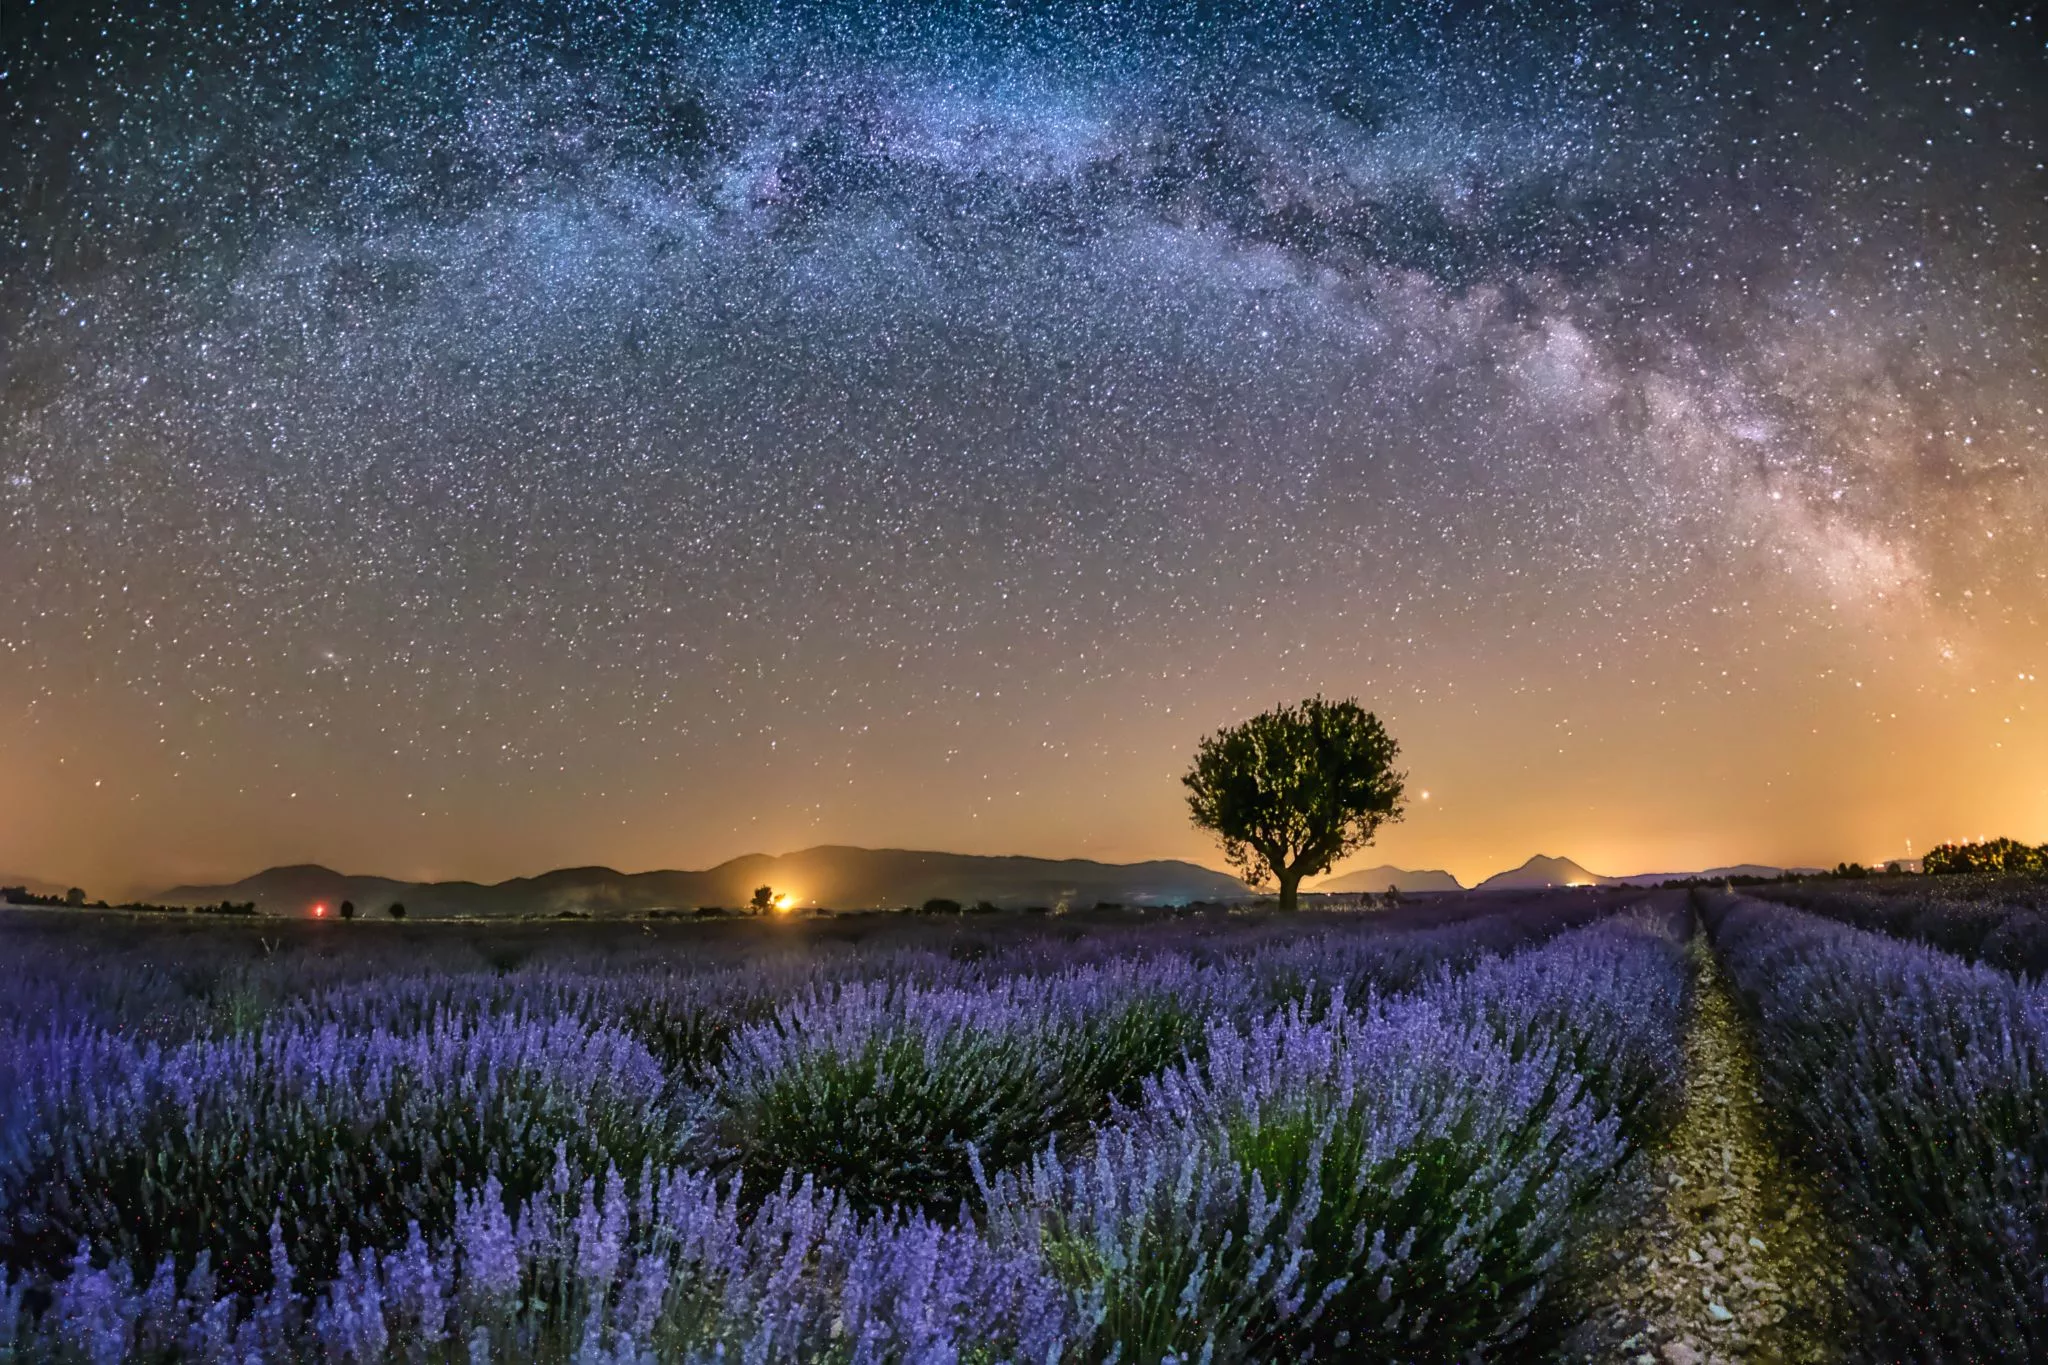 The tree at Valensole, France